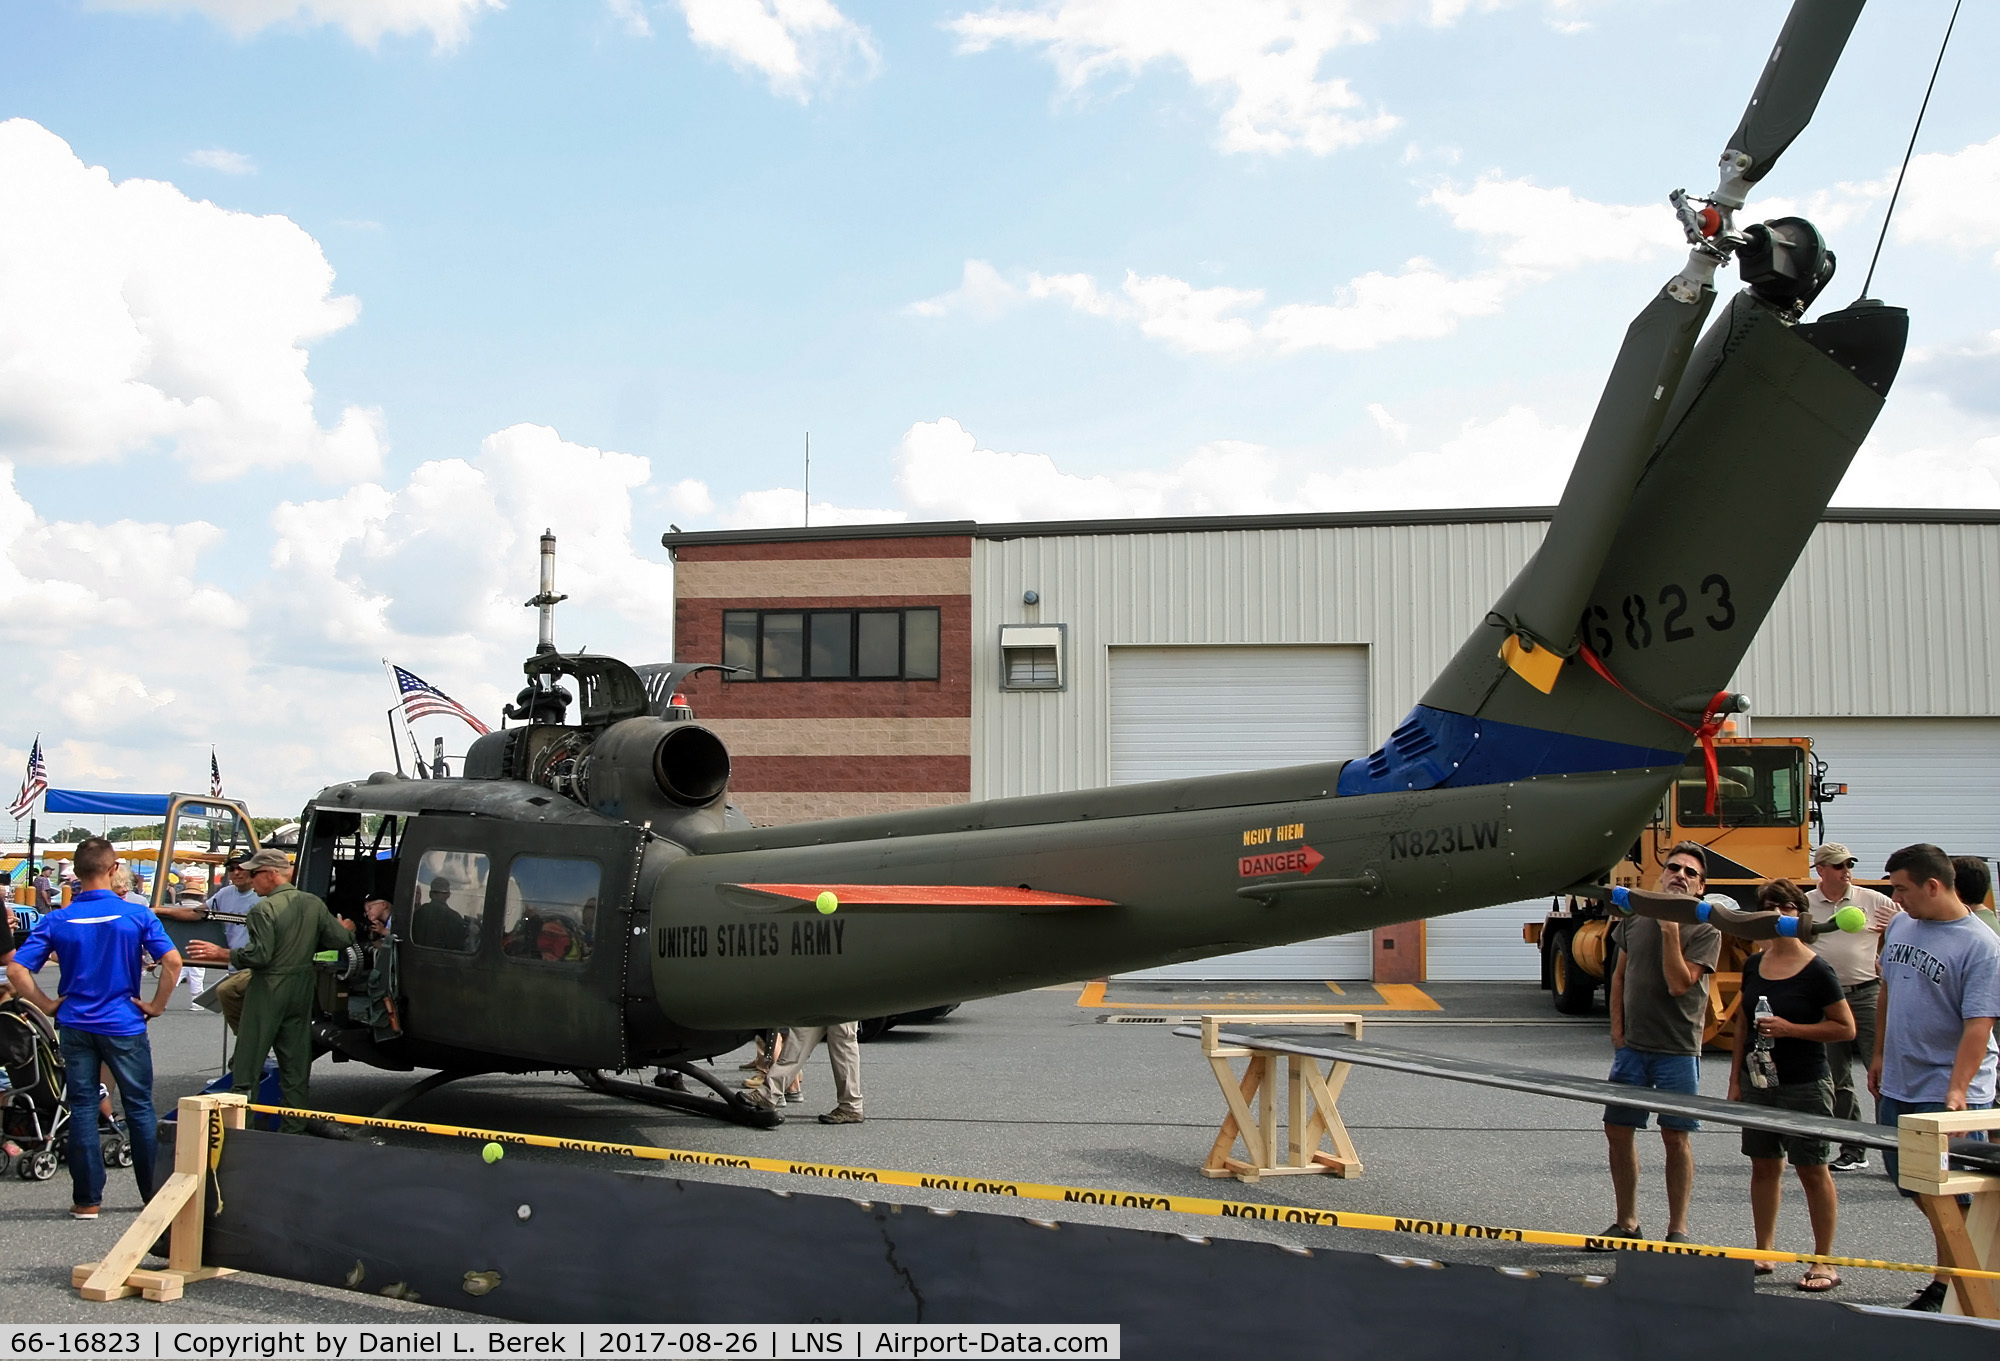 66-16823, 1966 Bell UH-1H Iroquois C/N 9017, The Liberty Warbird Association is restoring this Huey to honor the Vietnam veterans who flew this iconic machine and reunite them.